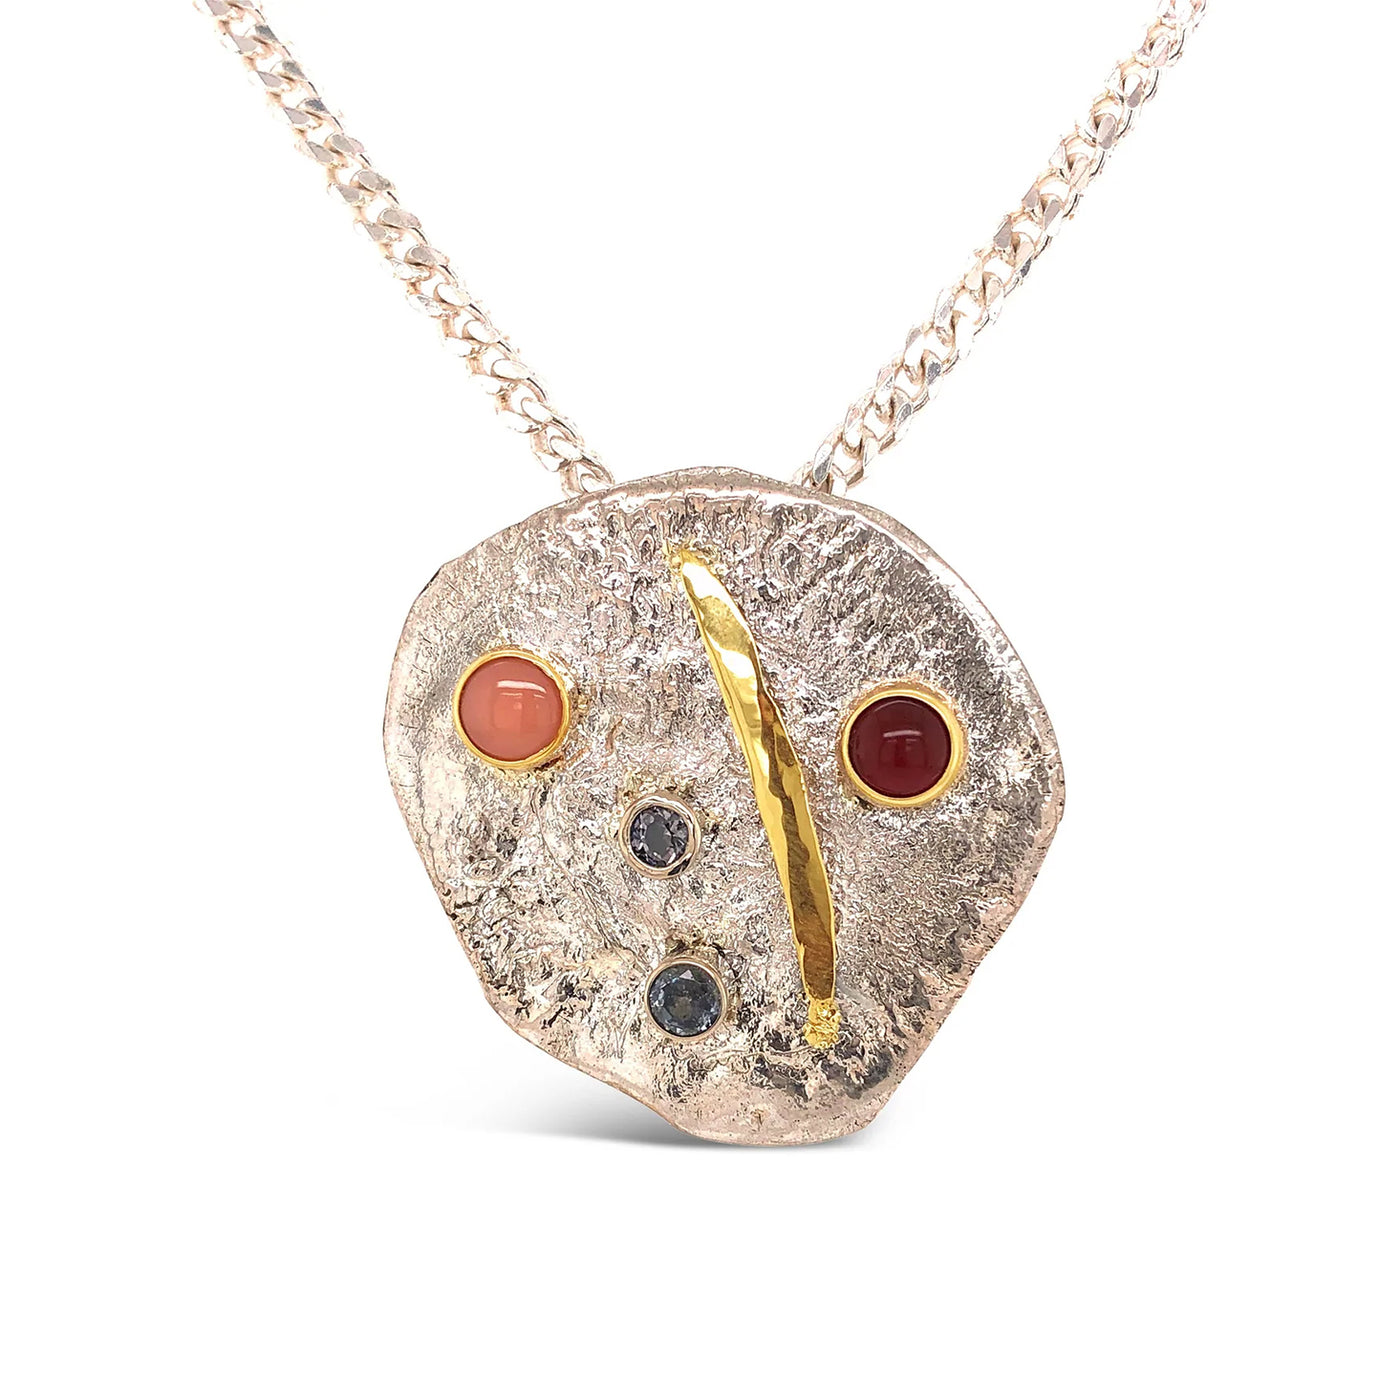 Original Irregular Sterling Disc with Colored Stones Necklace